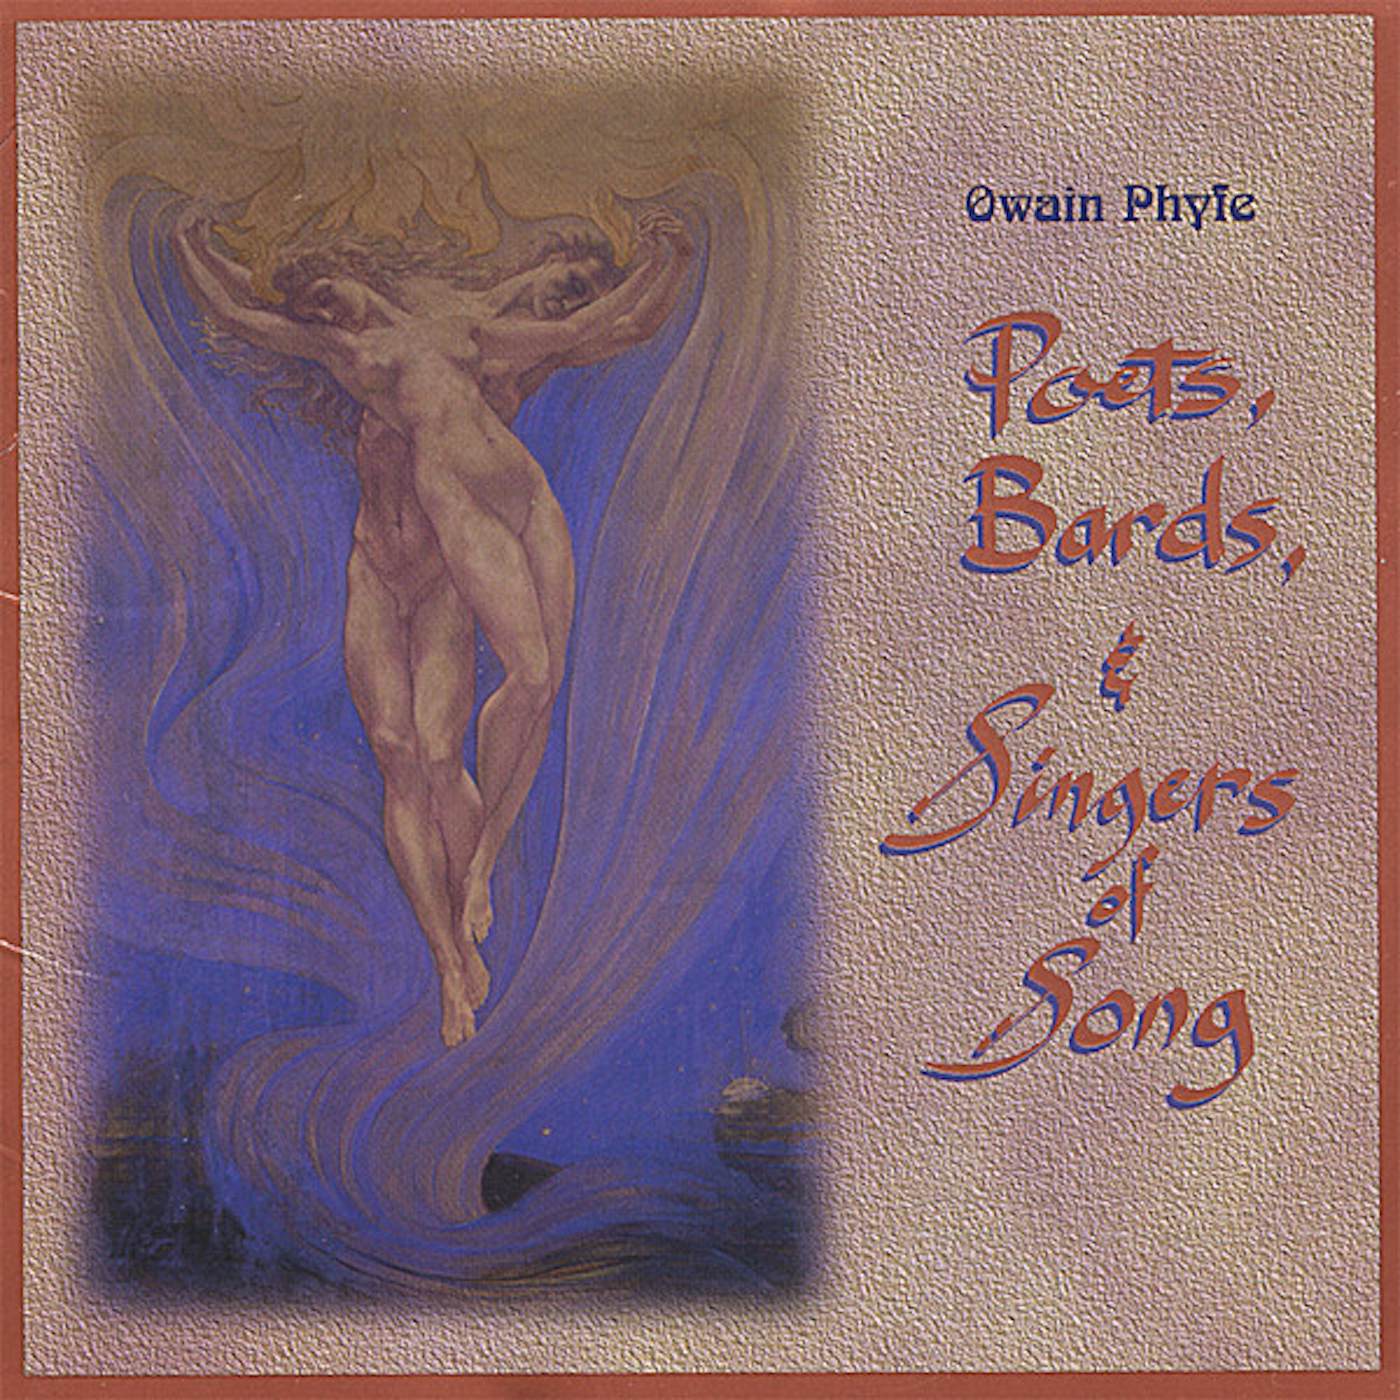 Owain Phyfe POETS BARDS & SINGERS OF SONG CD